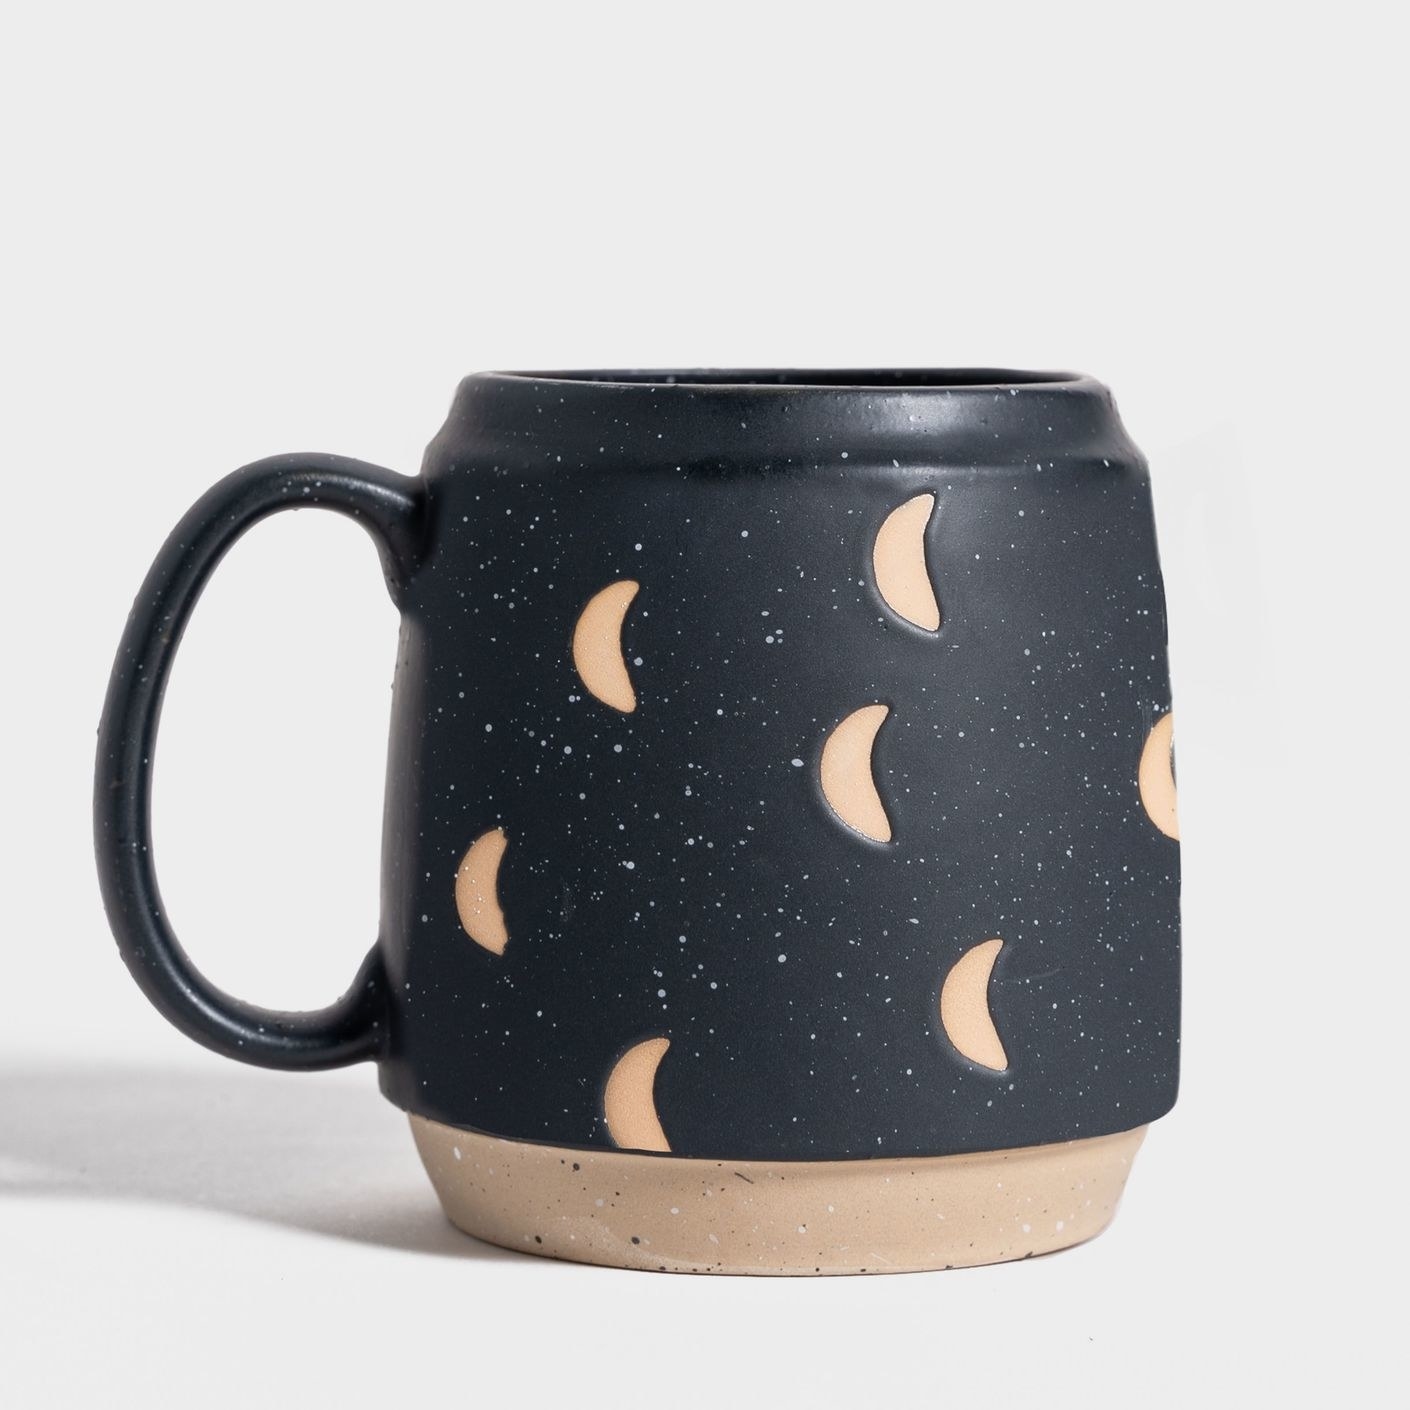 stoneware barrel-shaped mug with a black speckled glaze and an unglazed crescent moon pattern